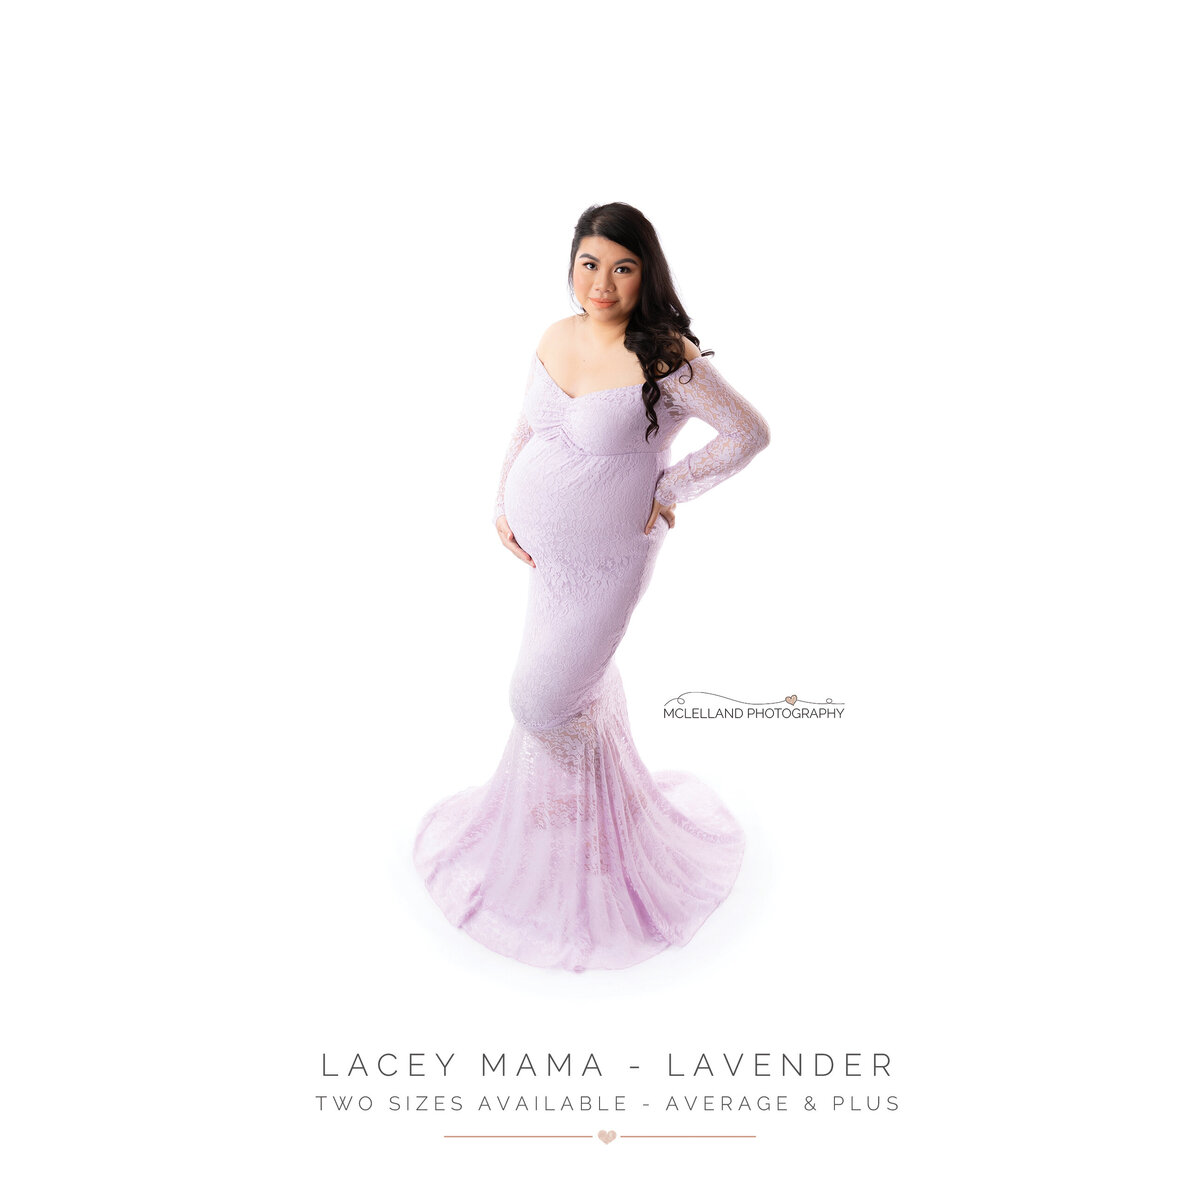 Lacey Mama - Lavender